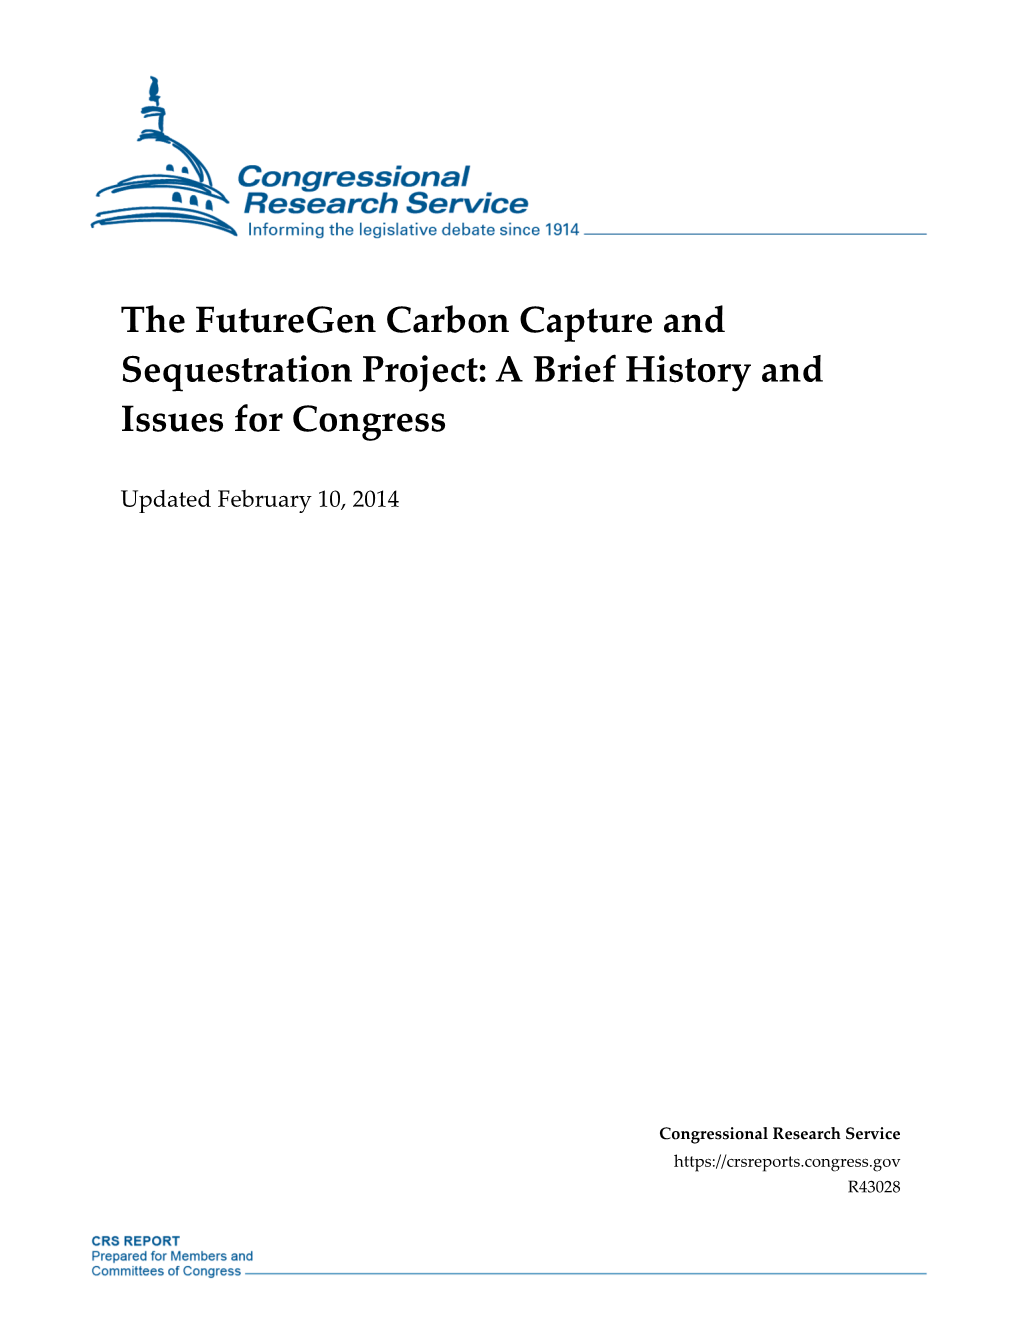 The Futuregen Carbon Capture and Sequestration Project: a Brief History and Issues for Congress